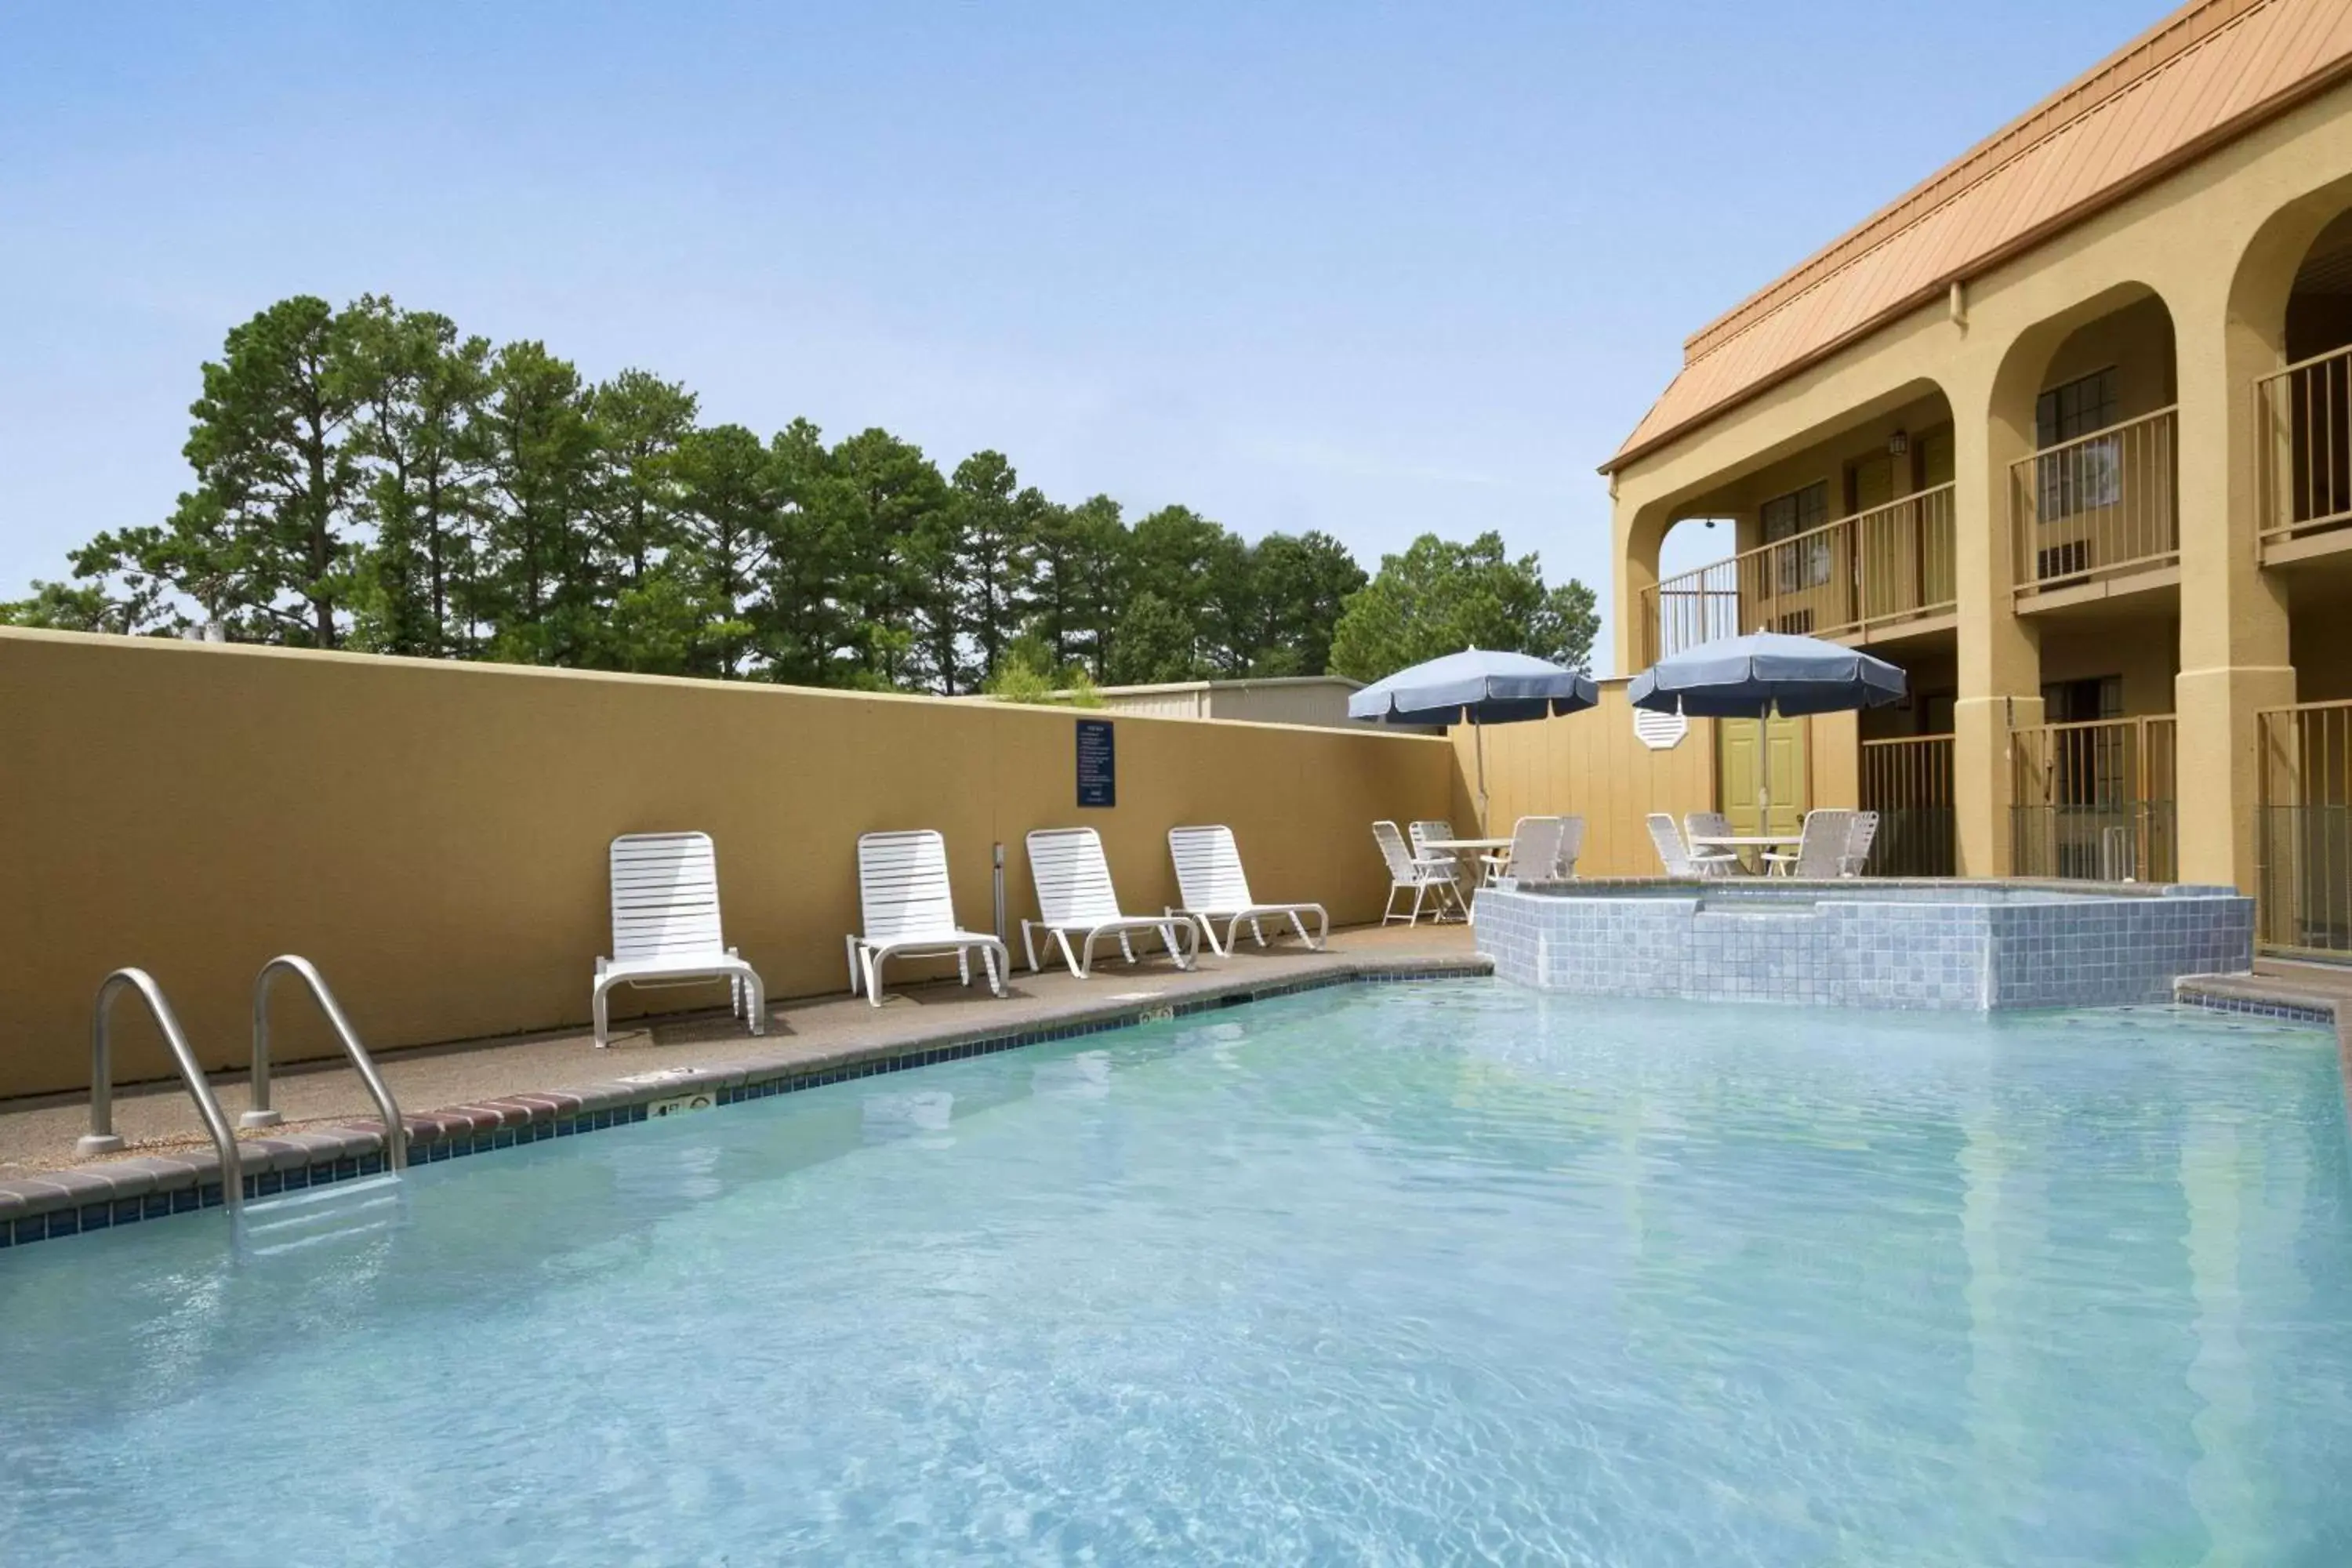 On site, Swimming Pool in Days Inn by Wyndham Southaven MS